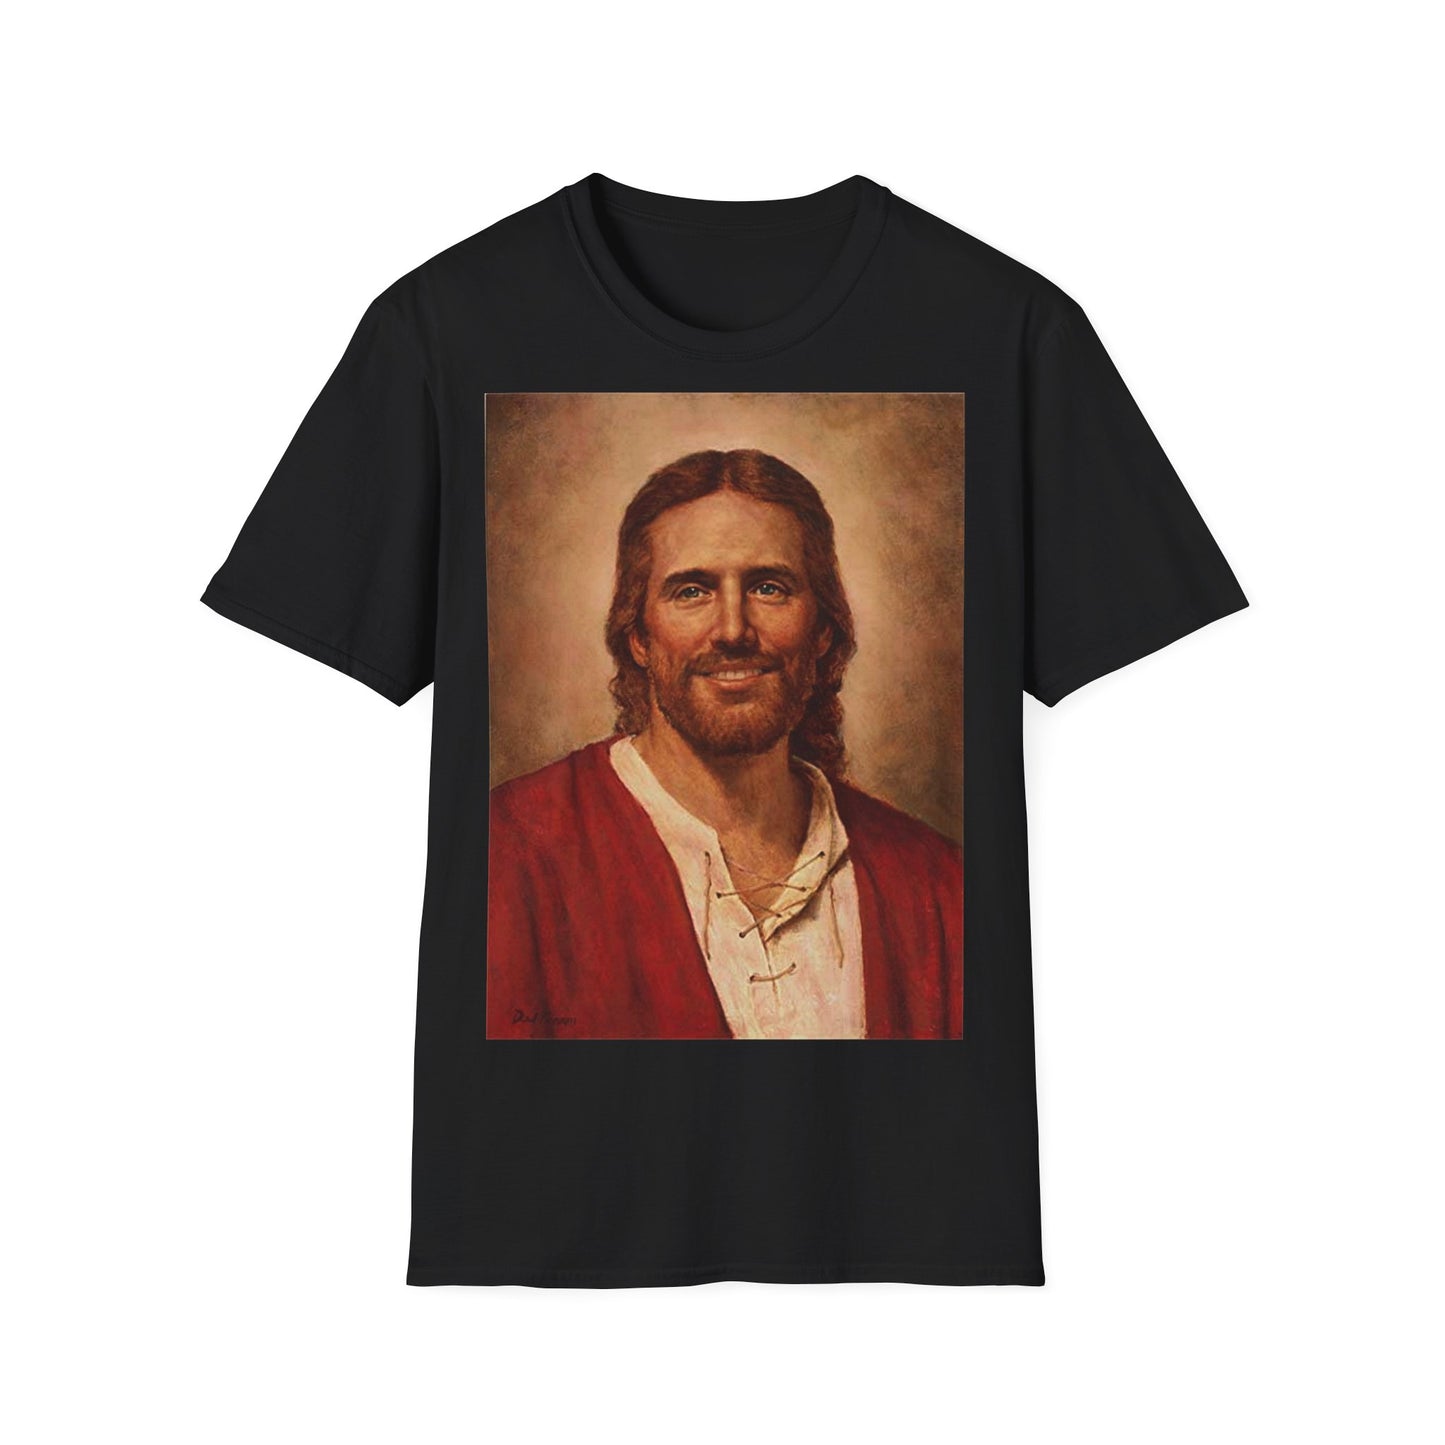 A black t-shirt with a painting of Jesus Christ smiling.